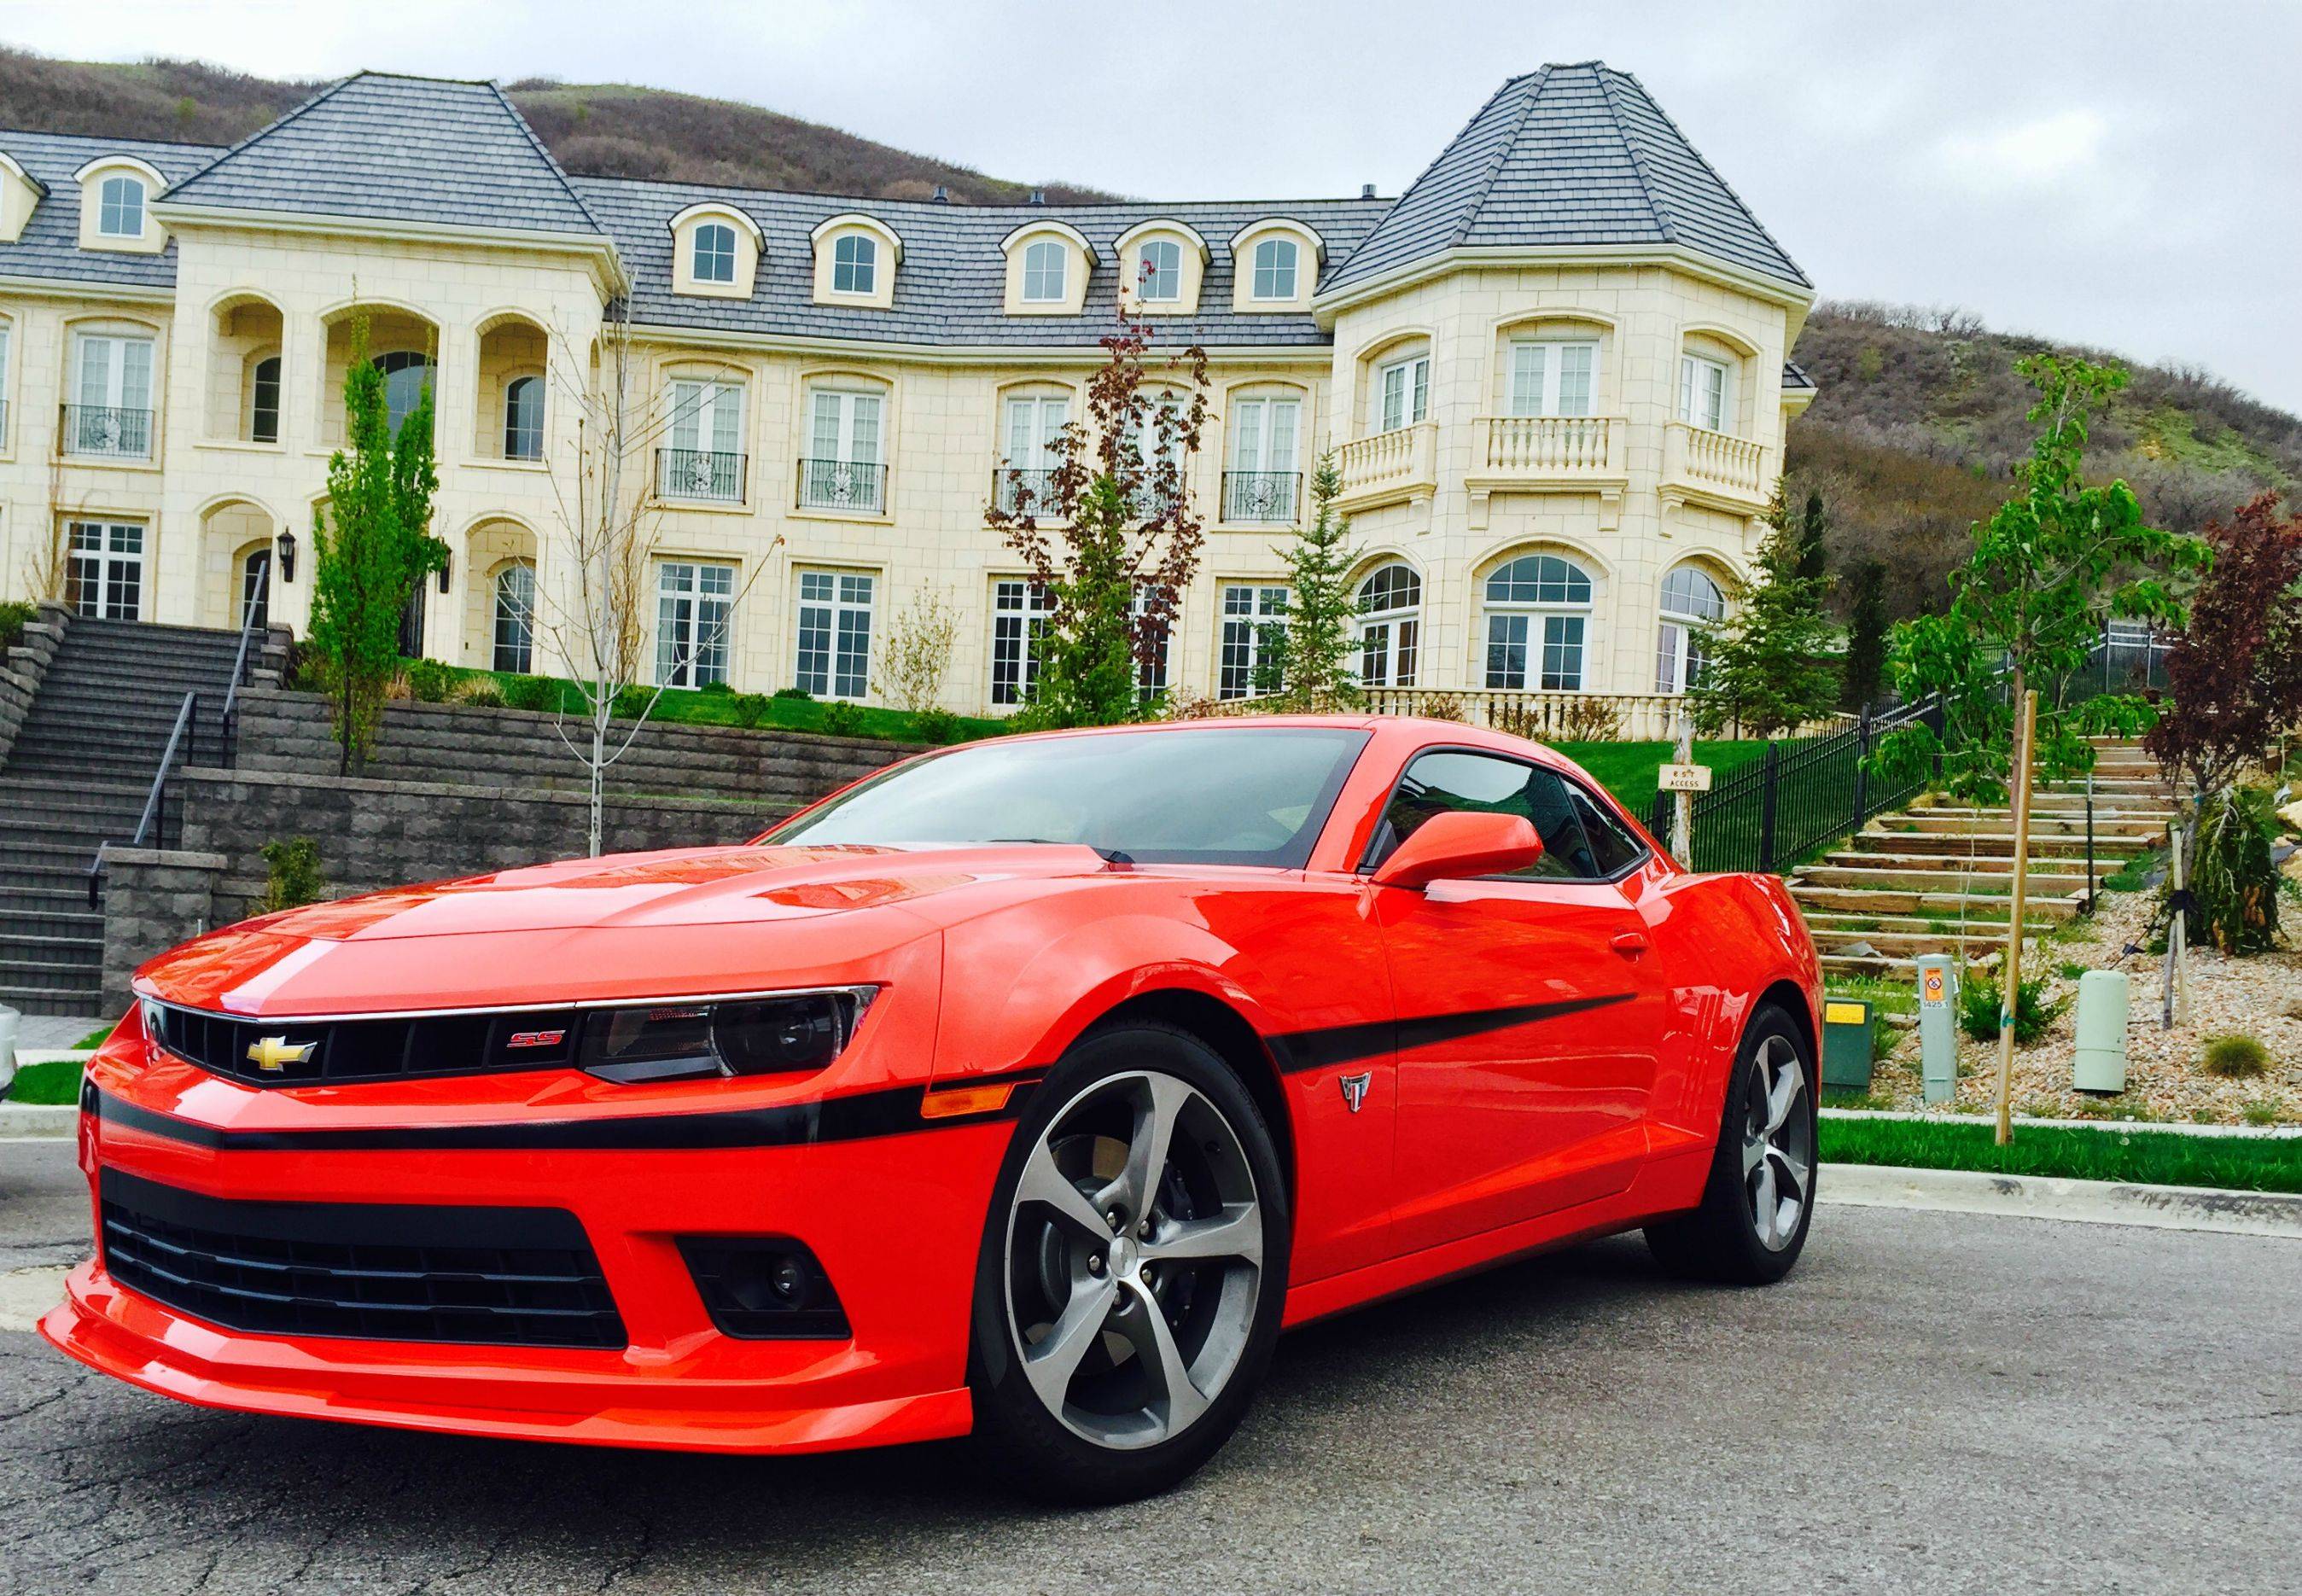 15 Stunning Pictures of Chevrolet Camaro Special Editions Over The Years